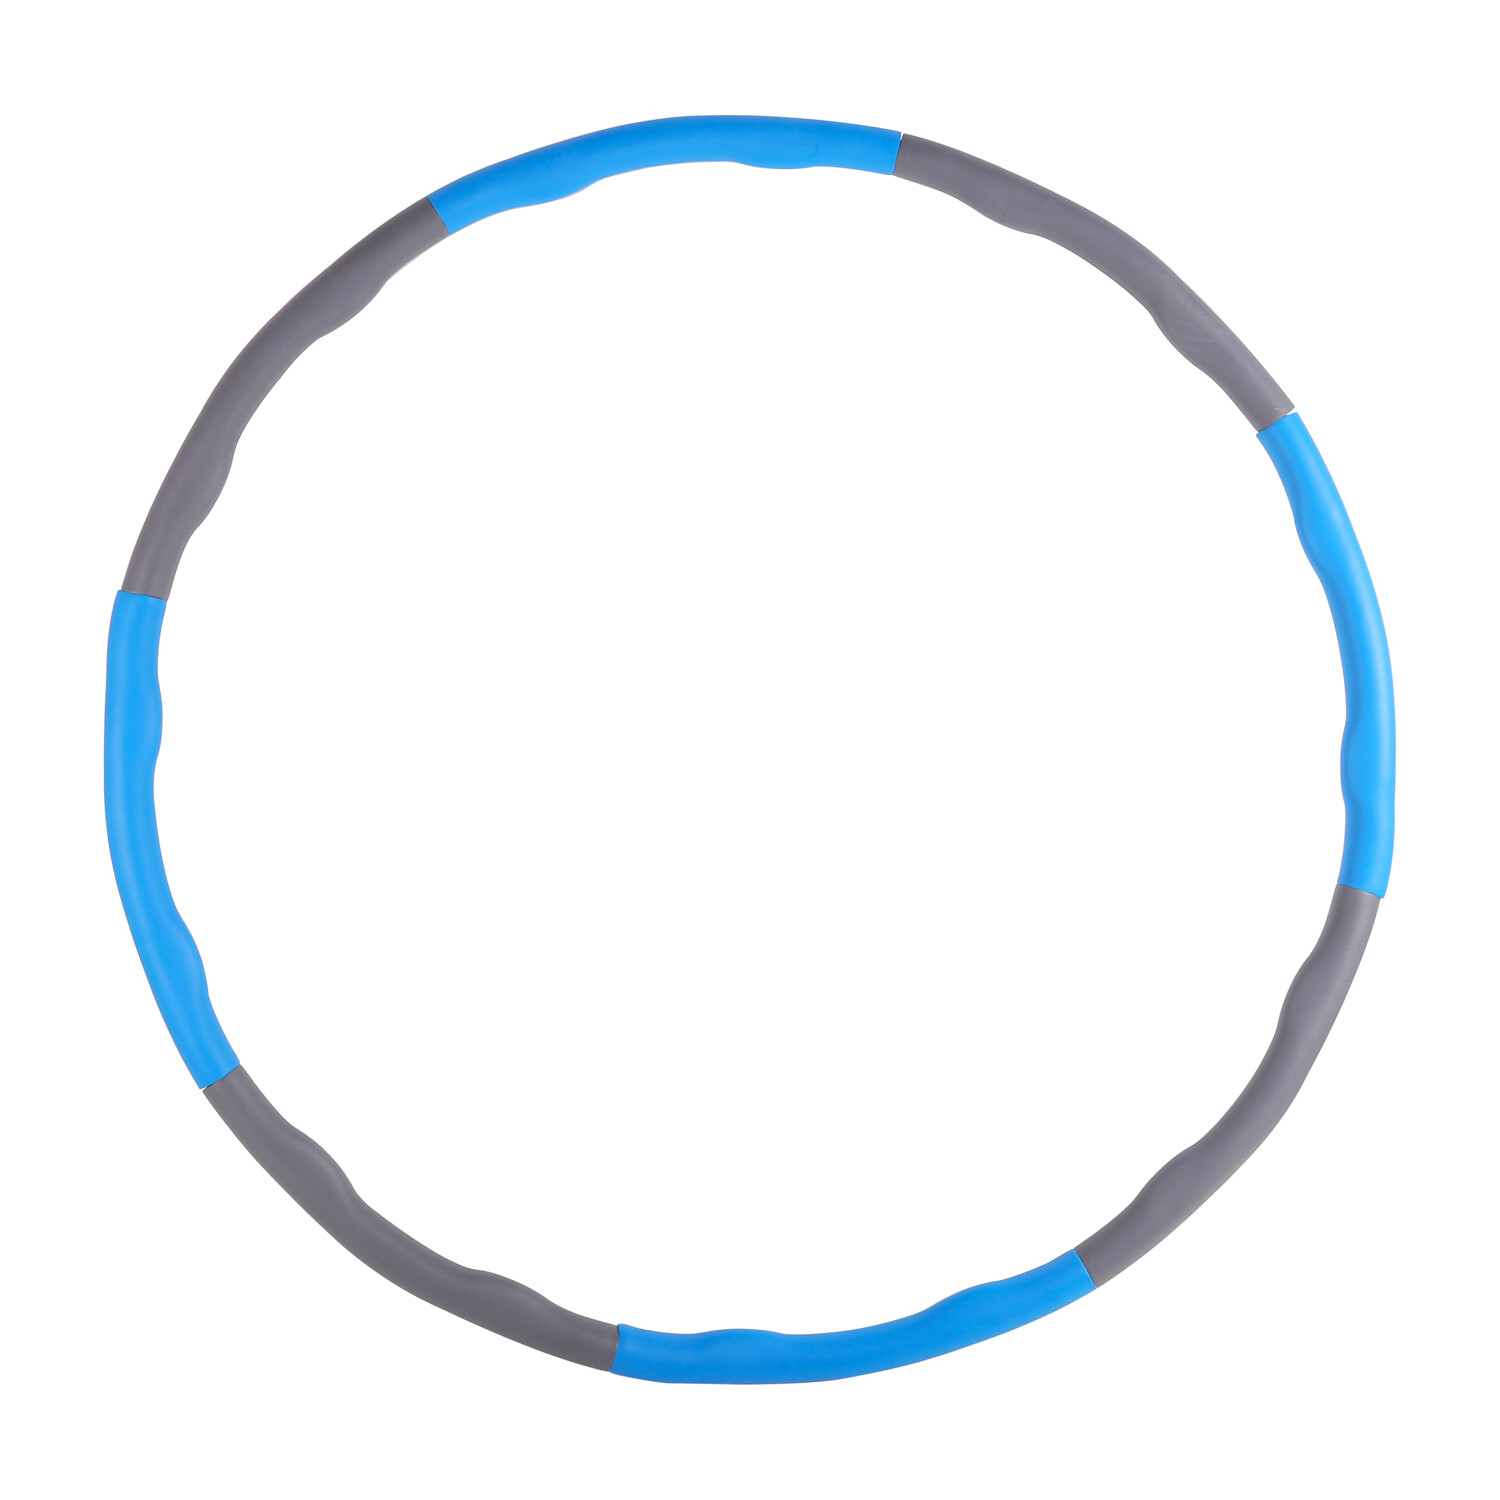 Active Sport Blue and Grey Weighted Hula Hoop Image 2